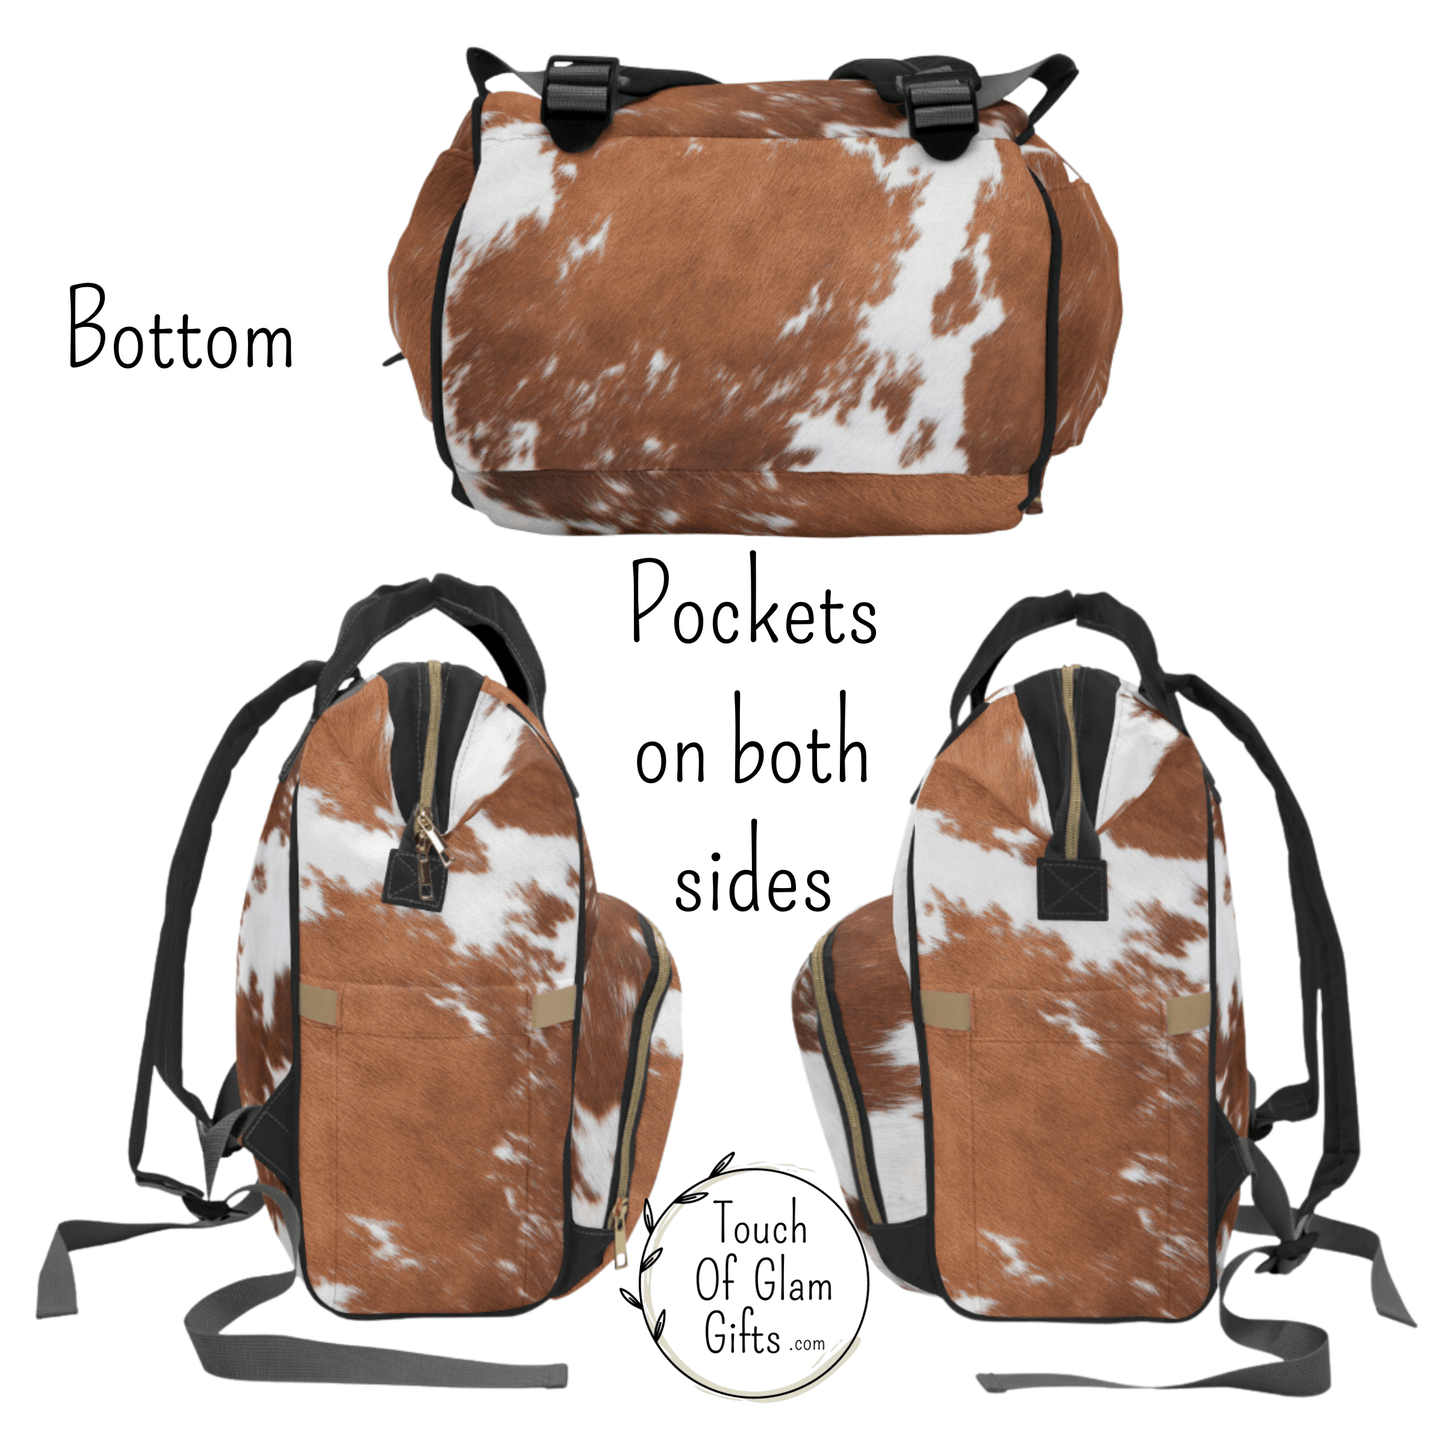 Up close look at the bottom of the cow print backpack shows cowhide print on the bottom and sides. Both sides have pockets for water bottles too.